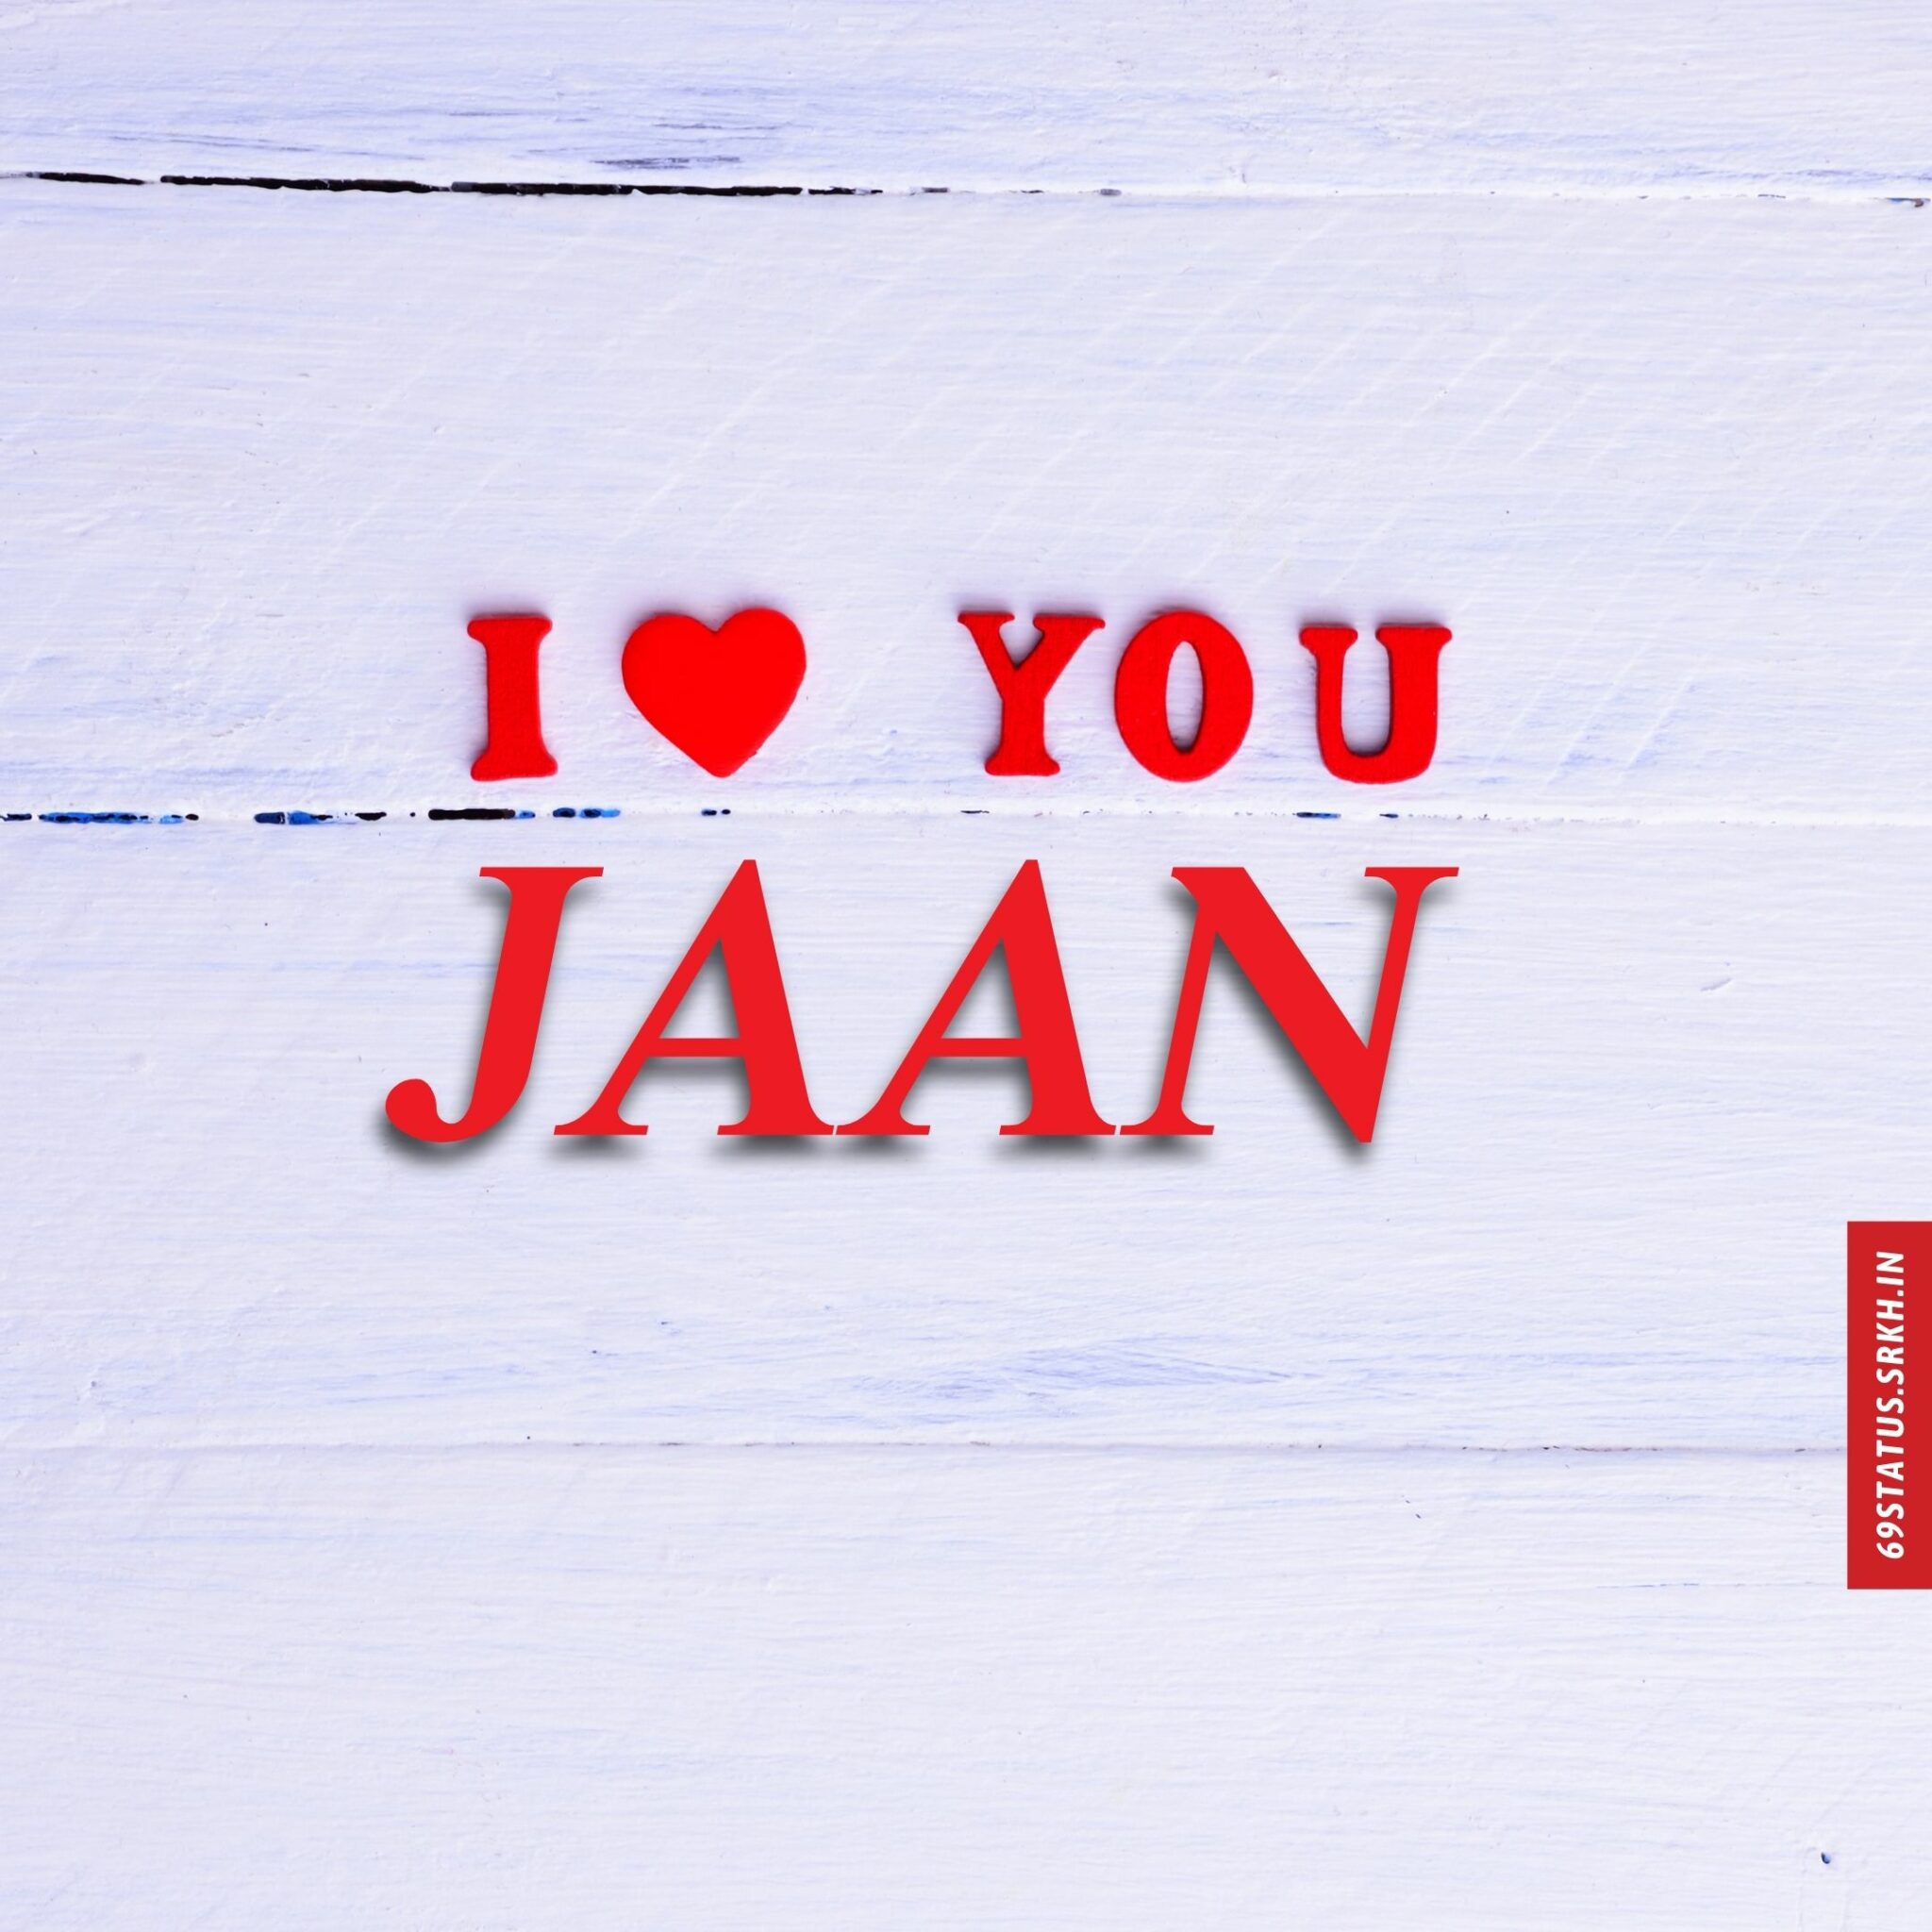 I Love You jaan images hd